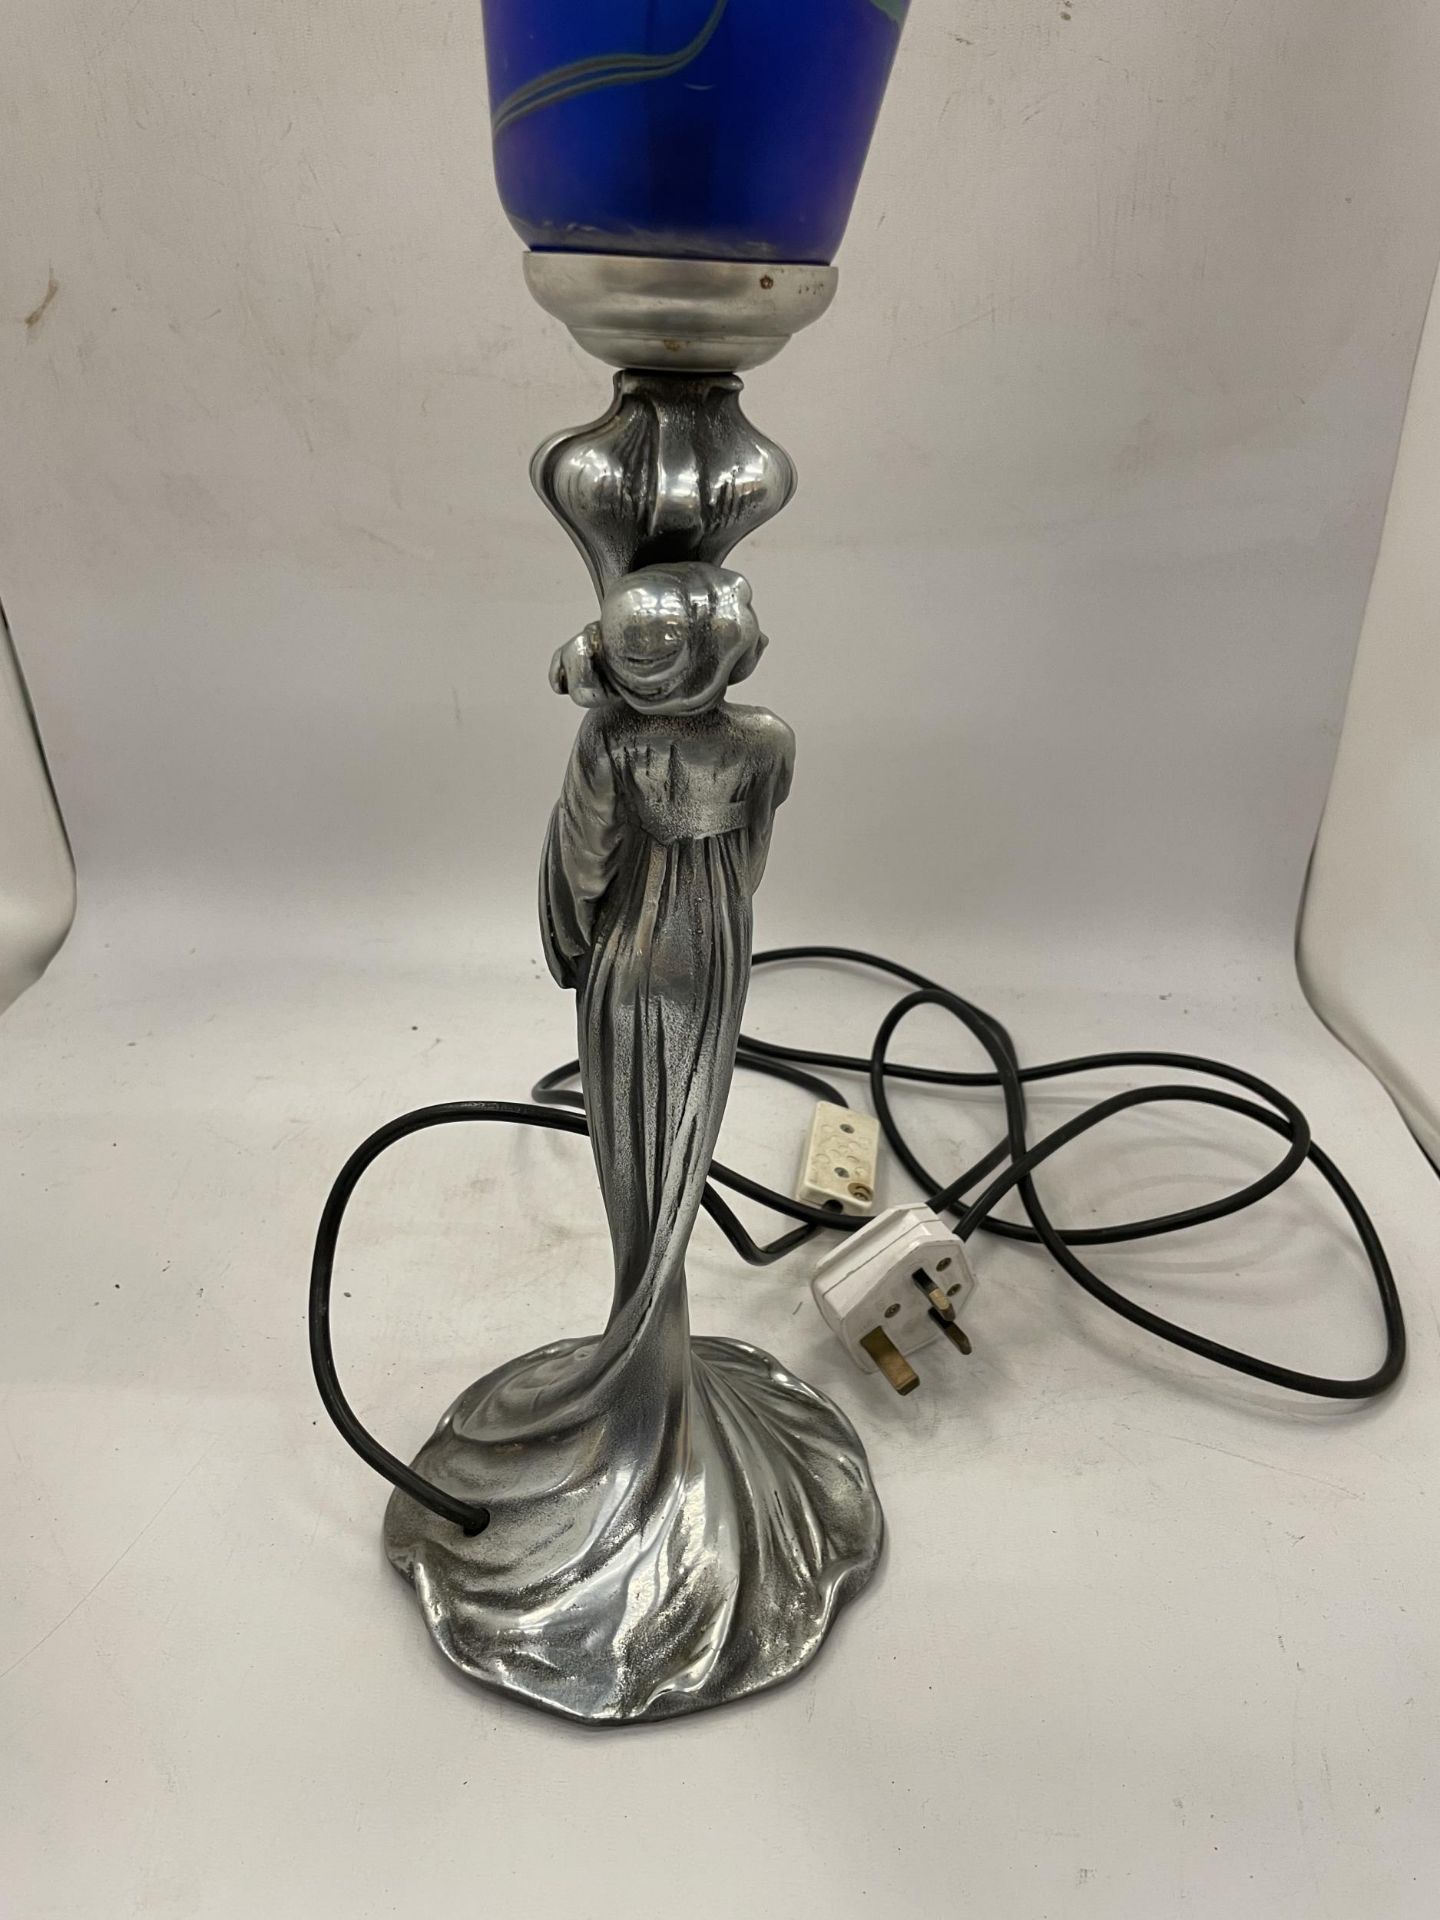 AN ART NOUVEAU DESIGN SILVER EFFECT FIGURAL TABLE LAMP WITH BLUE GLASS SHADE - Image 6 of 6